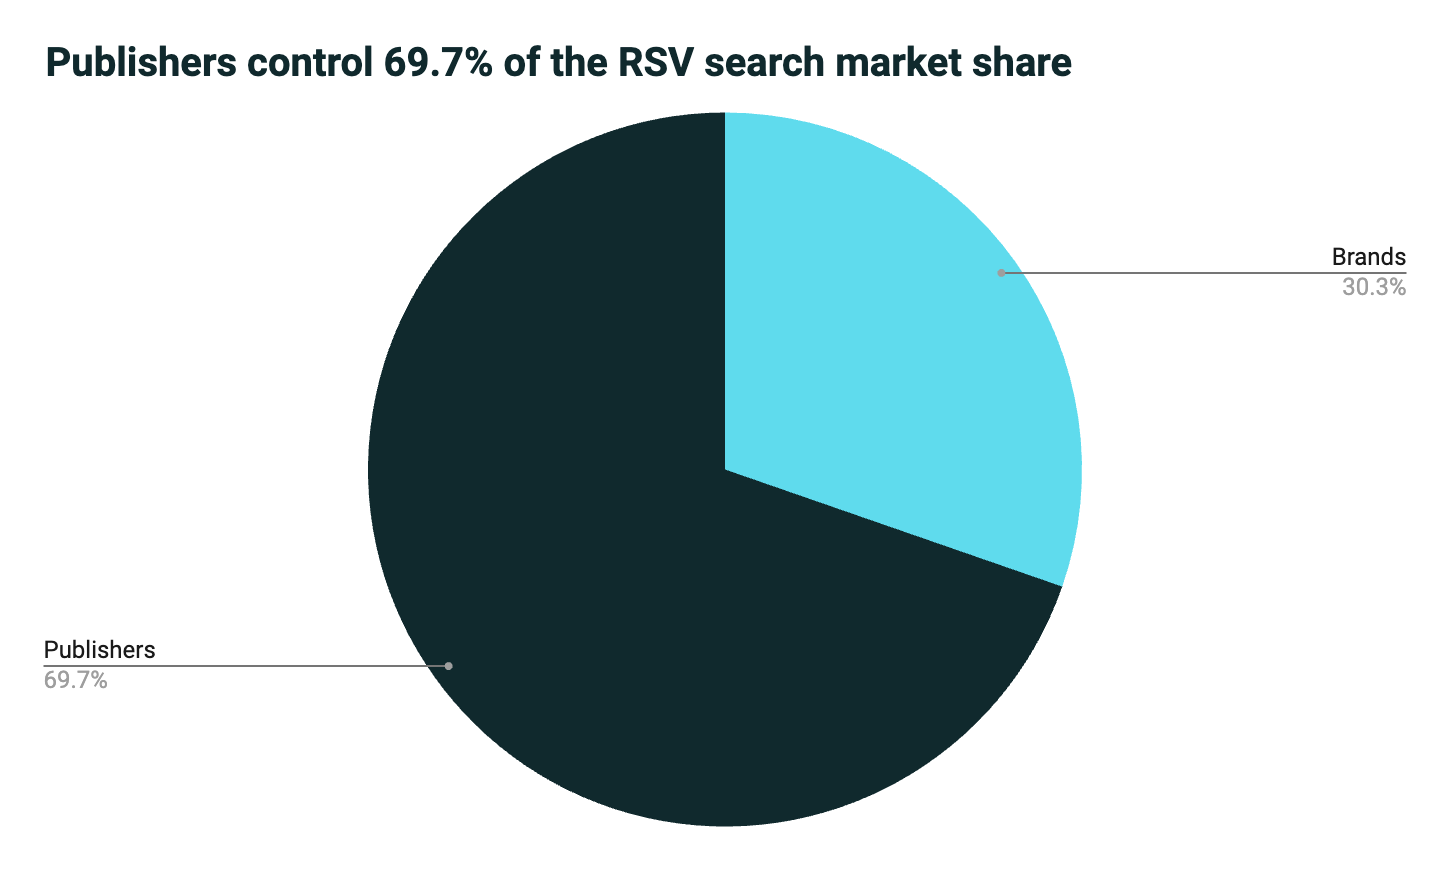 RSV search market share